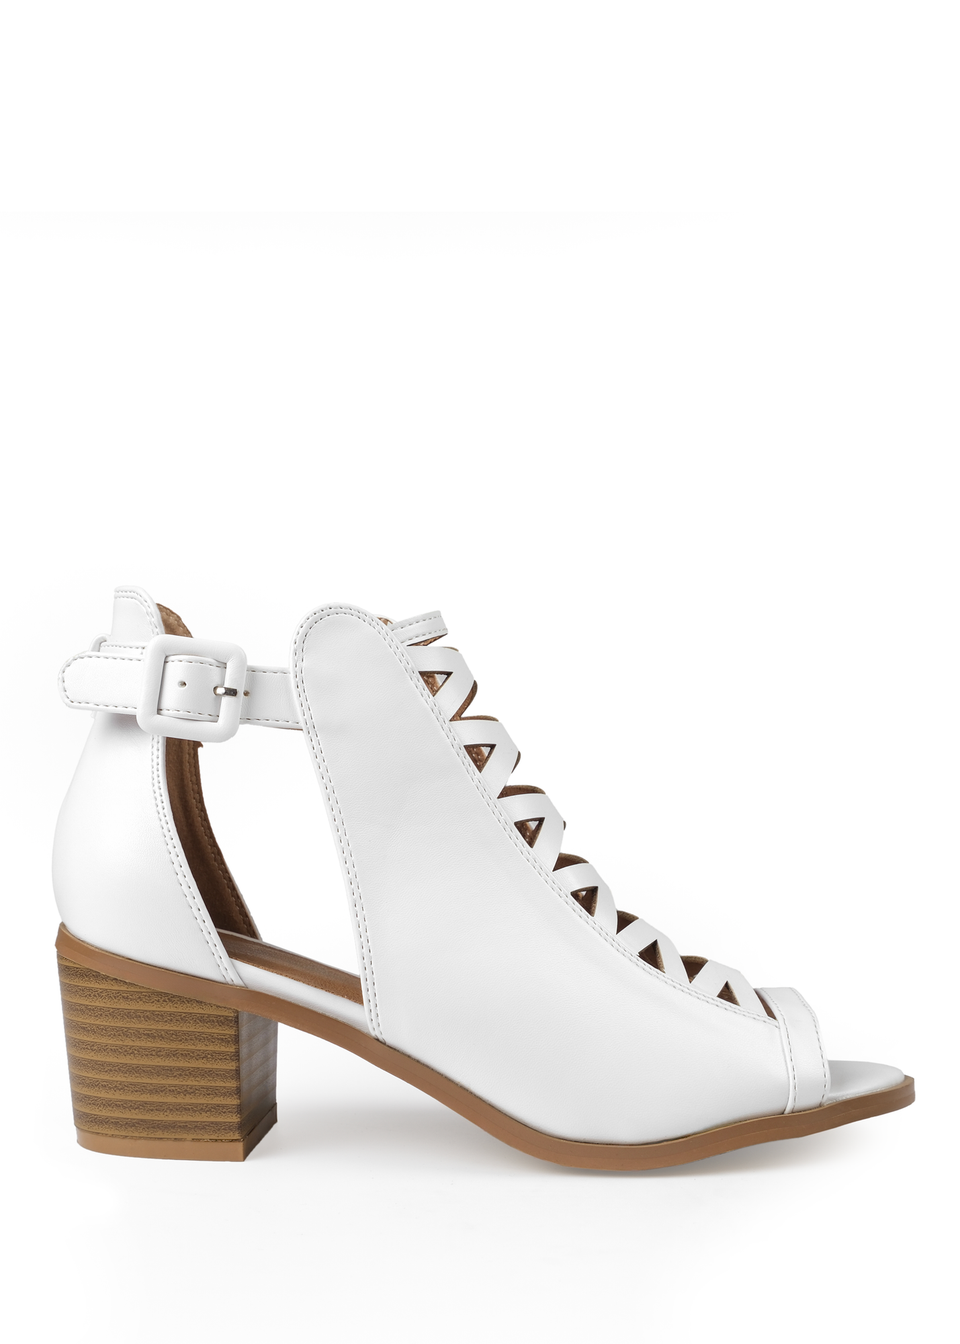 Where's That From White Pu Reydah Mid Block Heel Sandals